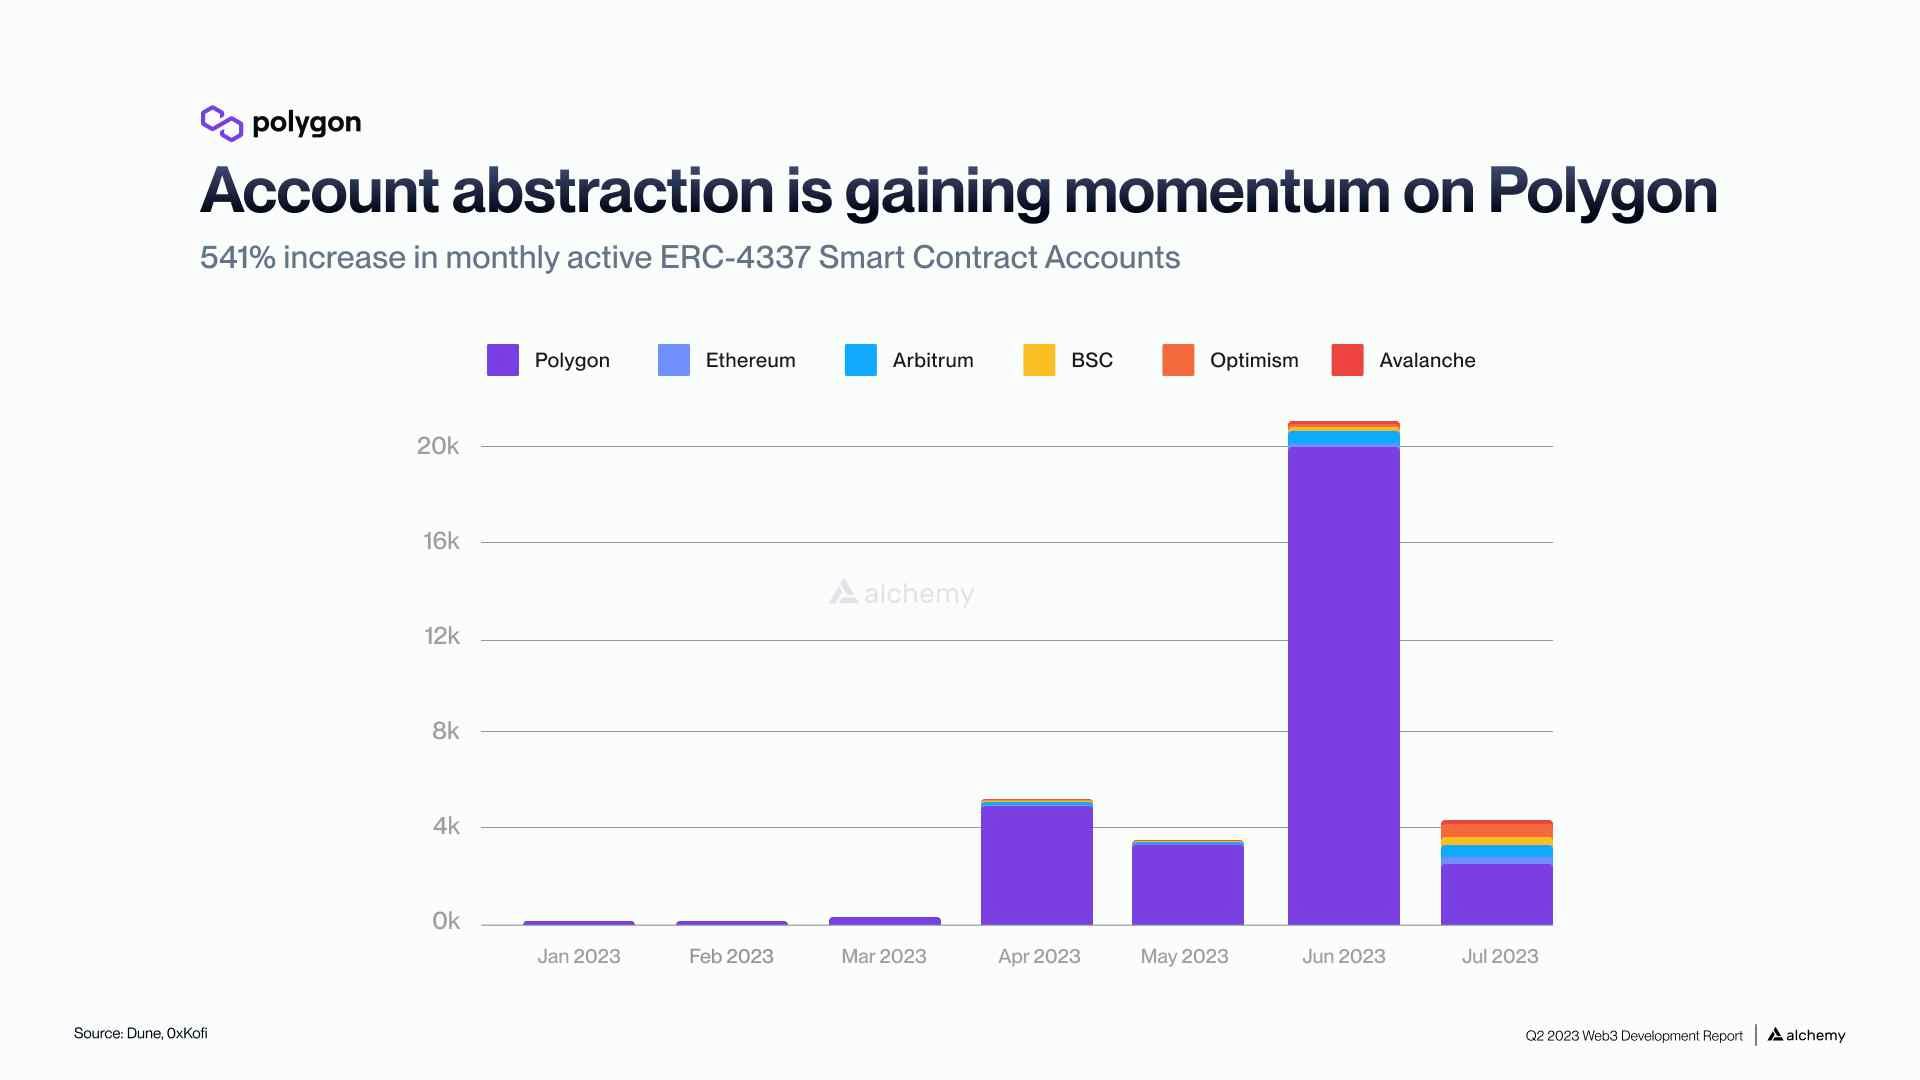 541% increase in monthly active smart contract accounts